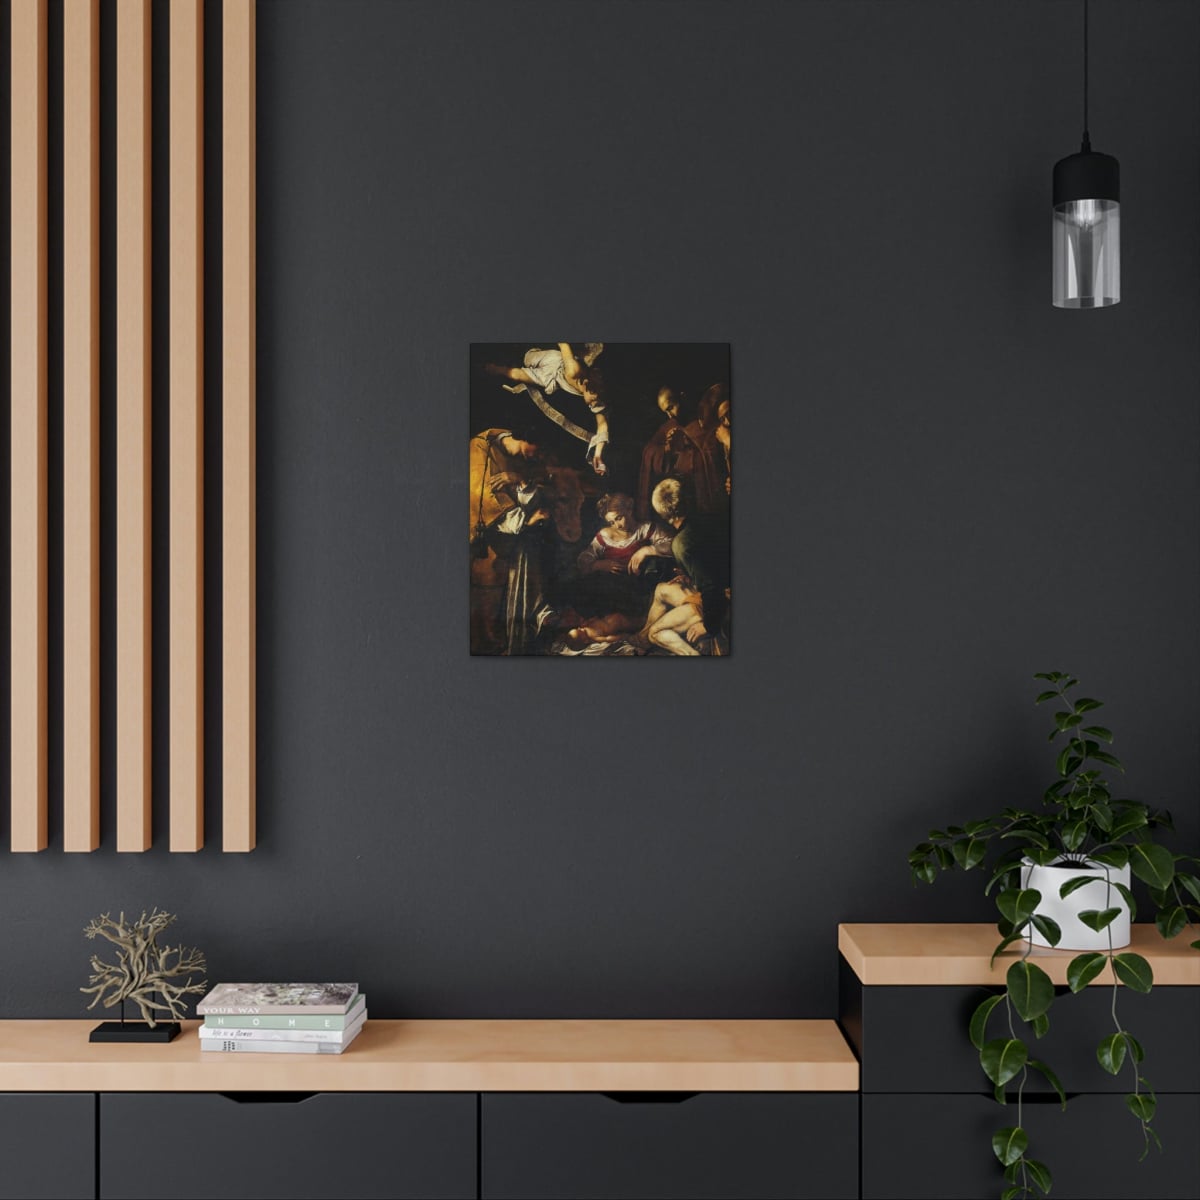 Nativity with St Francis and St Lawrence by Caravaggio Art Canvas Gallery Wraps